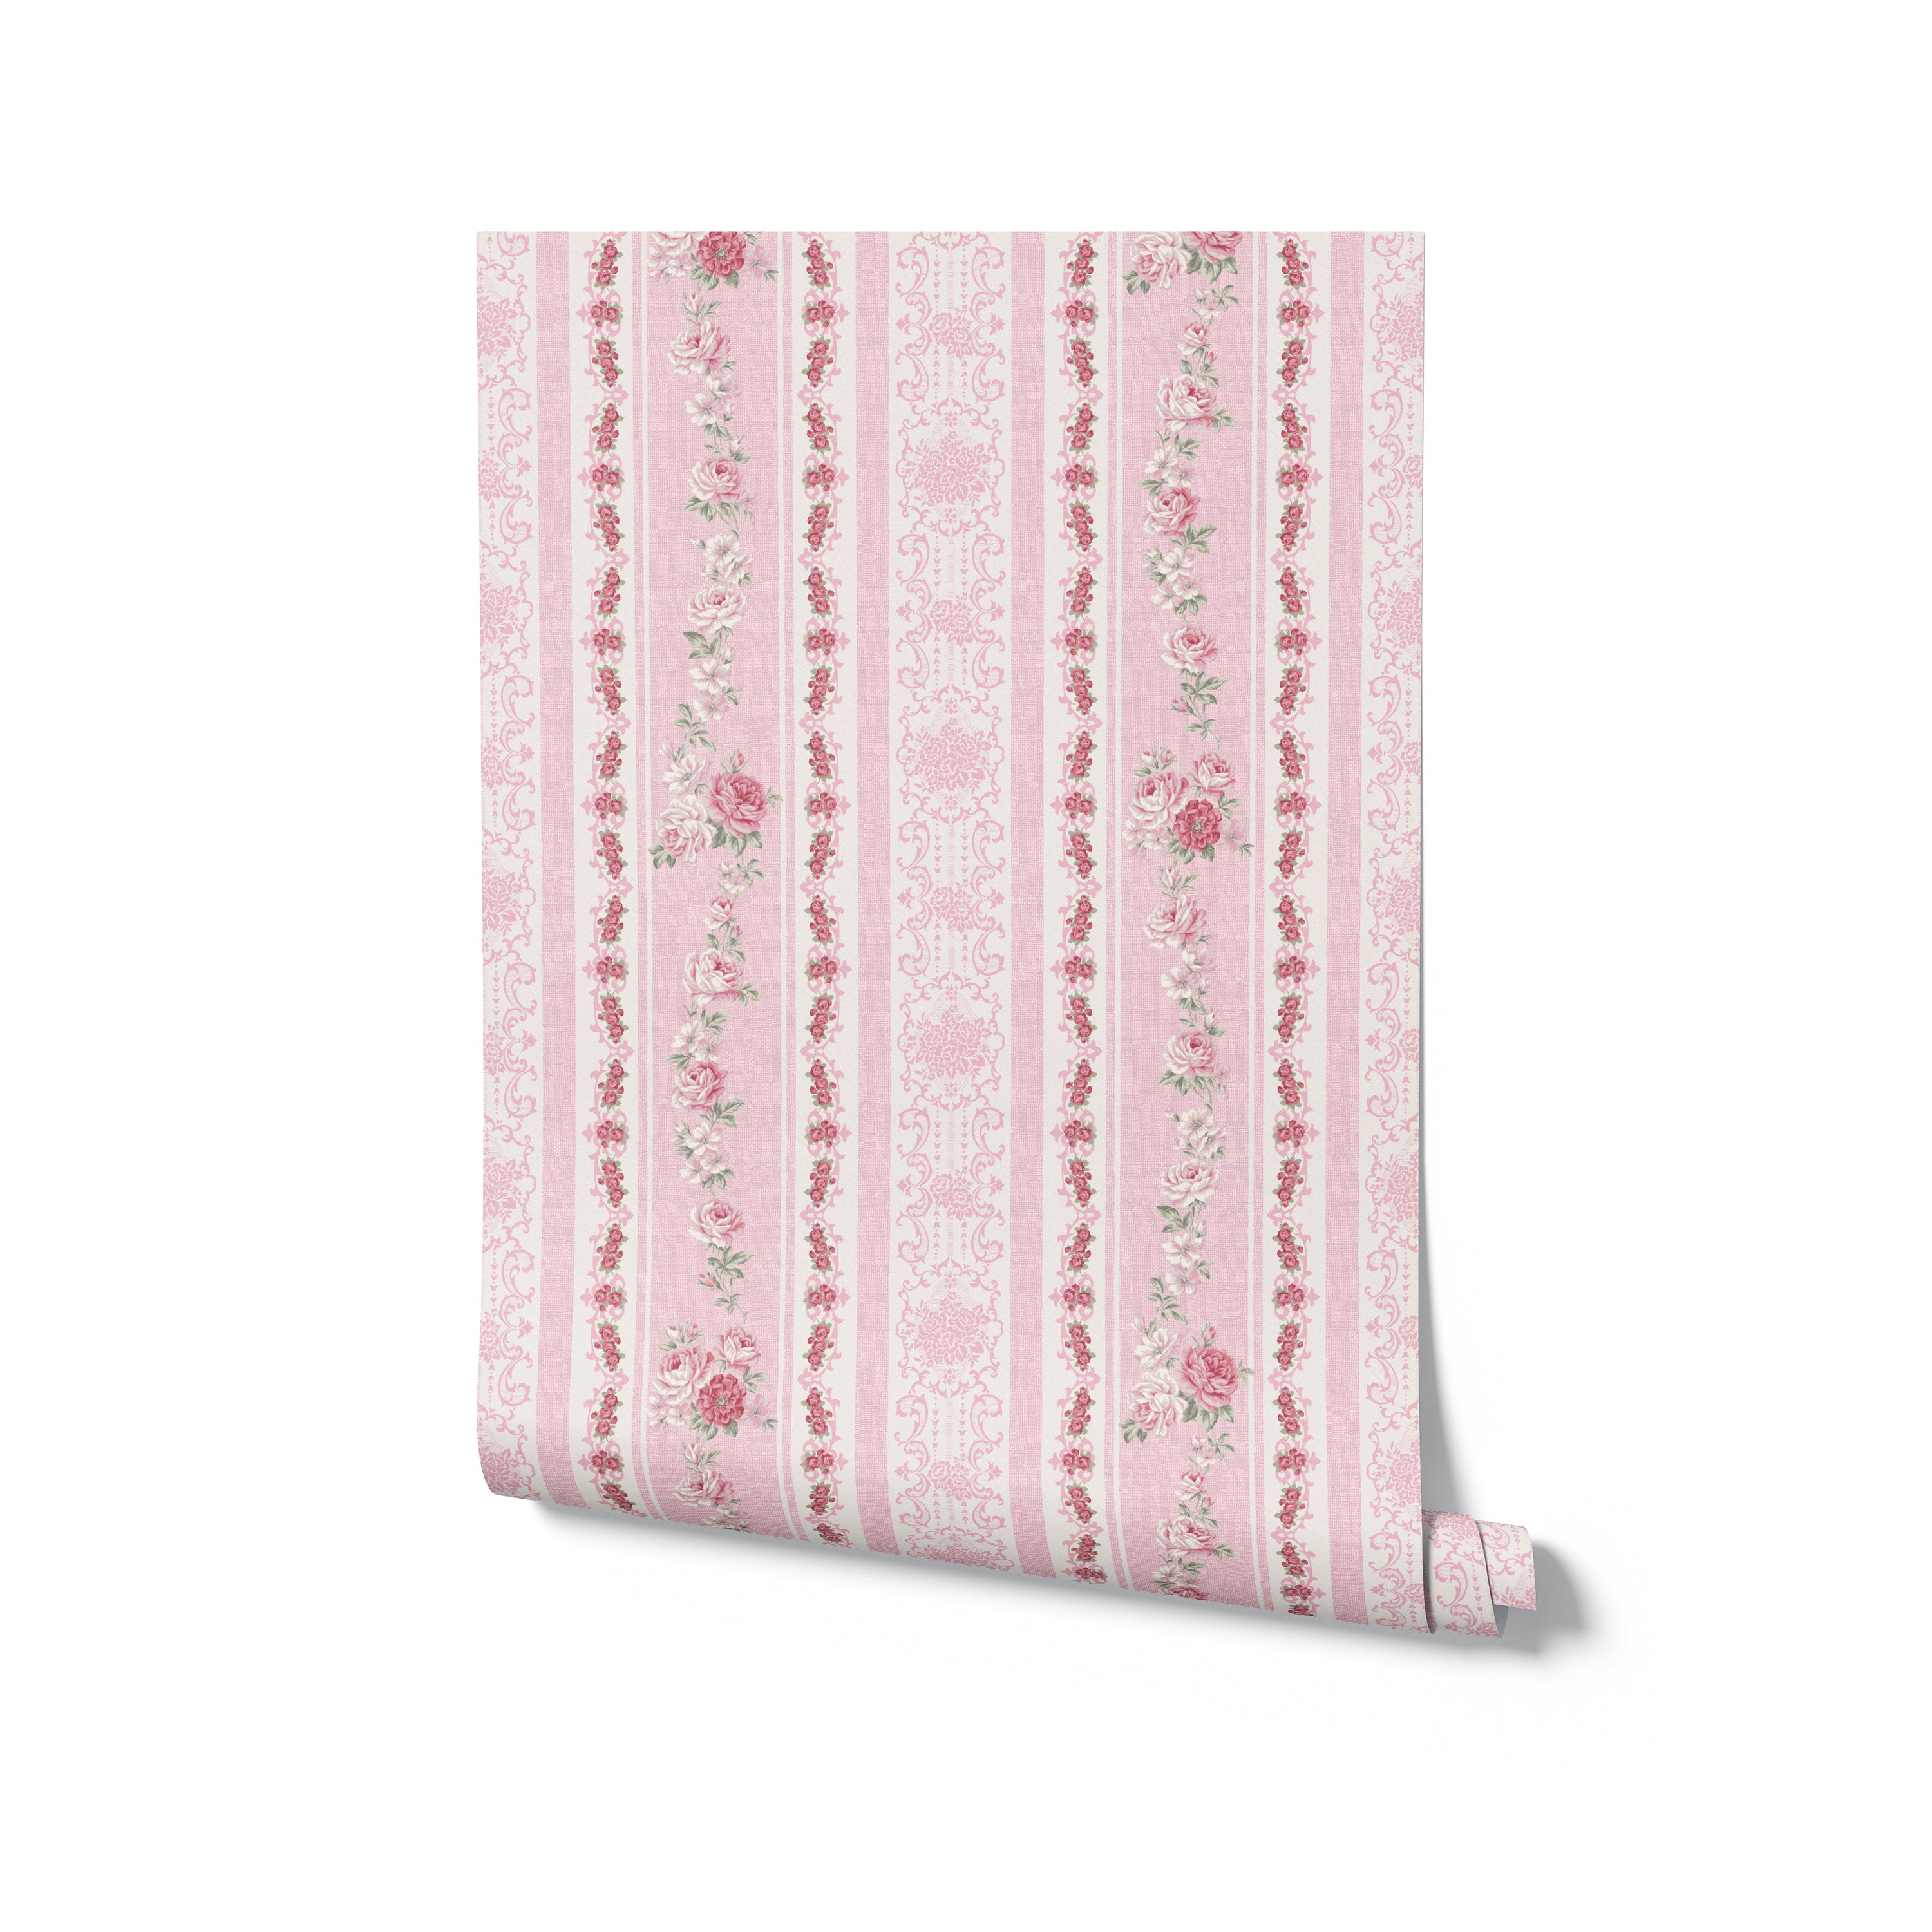 Rolled up piece of Vintage Rose Wallpaper against a white background. The wallpaper displays a traditional design with vertical pink stripes and intricate floral patterns in softer tones of pink and green.